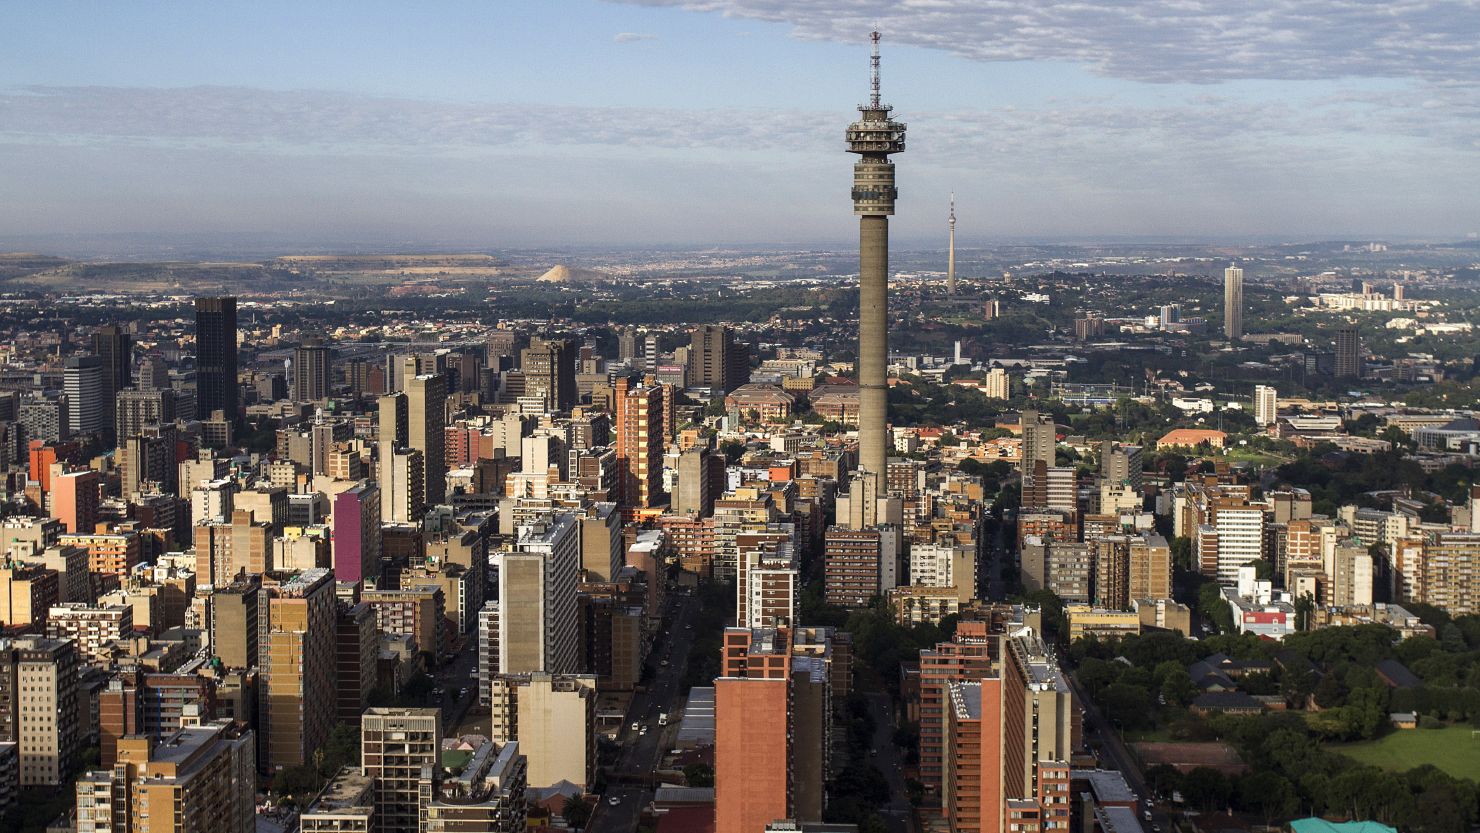 Johannesburg's increasingly vibrant neighborhoods are giving the city more confidence when compared with Cape Town.